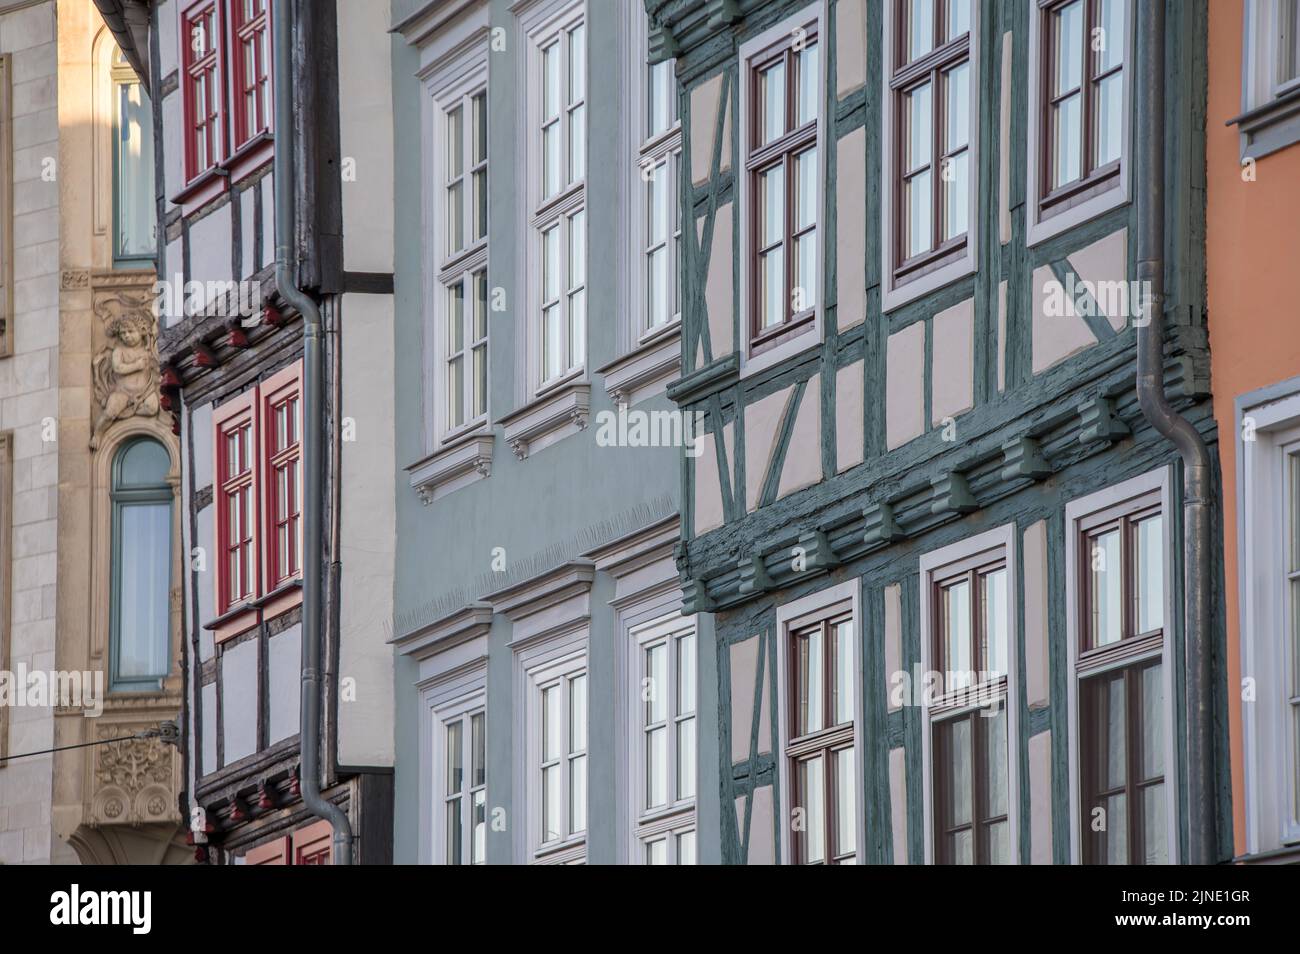 Historic half-timbered houses in the old town of Erfurt Stock Photo